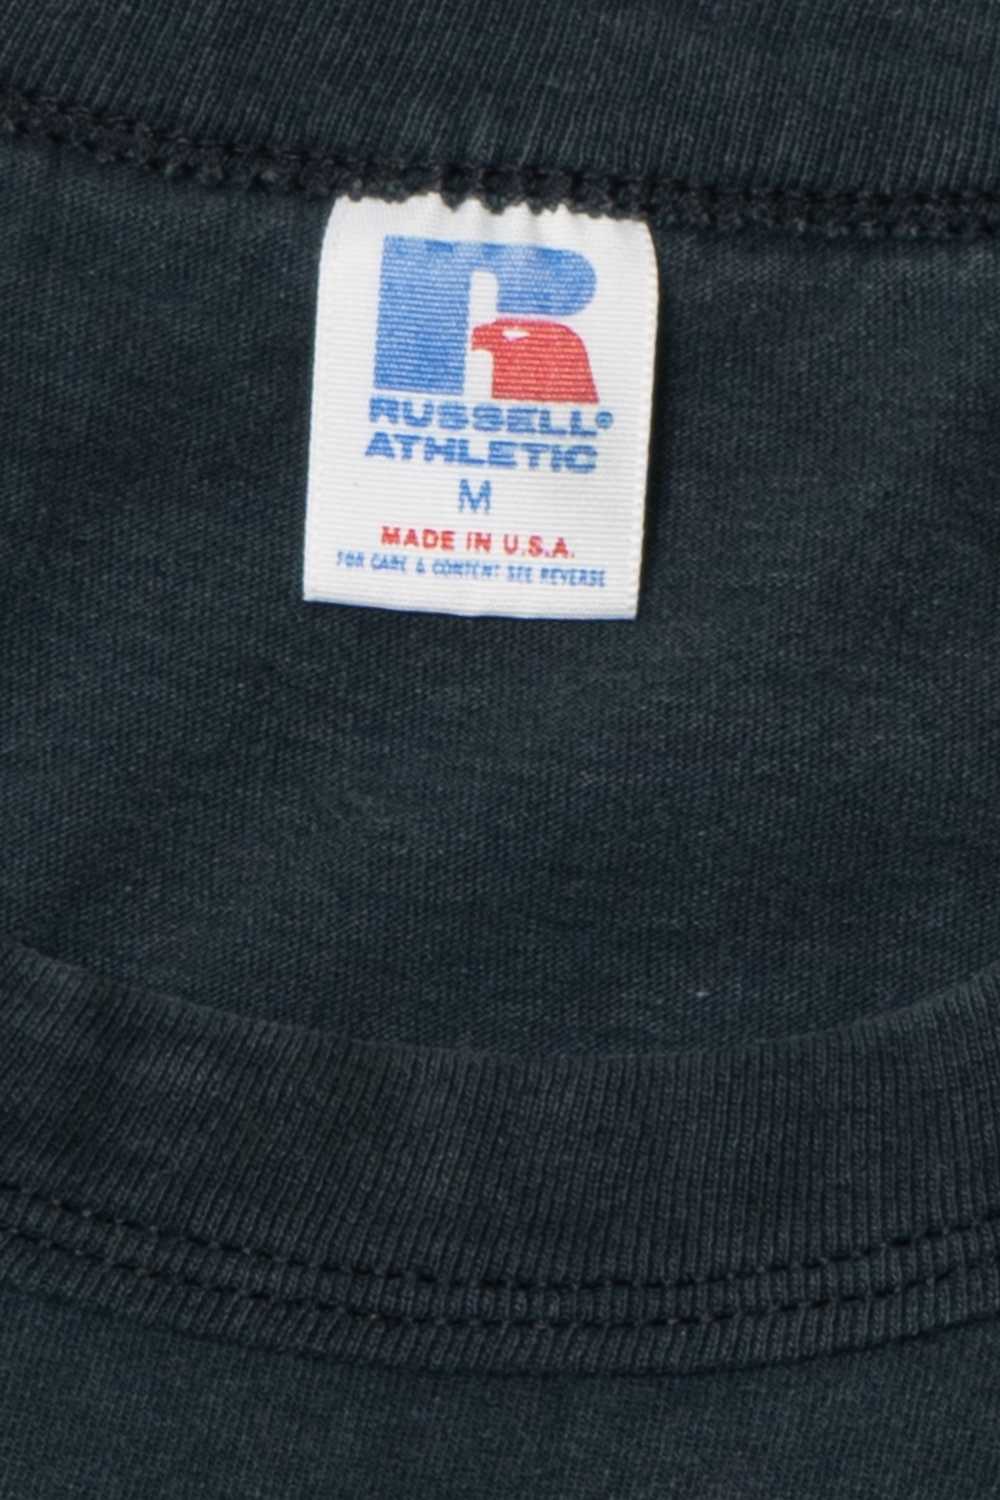 Vintage Russell Athletic Muscle Tank Top T-Shirt - image 4